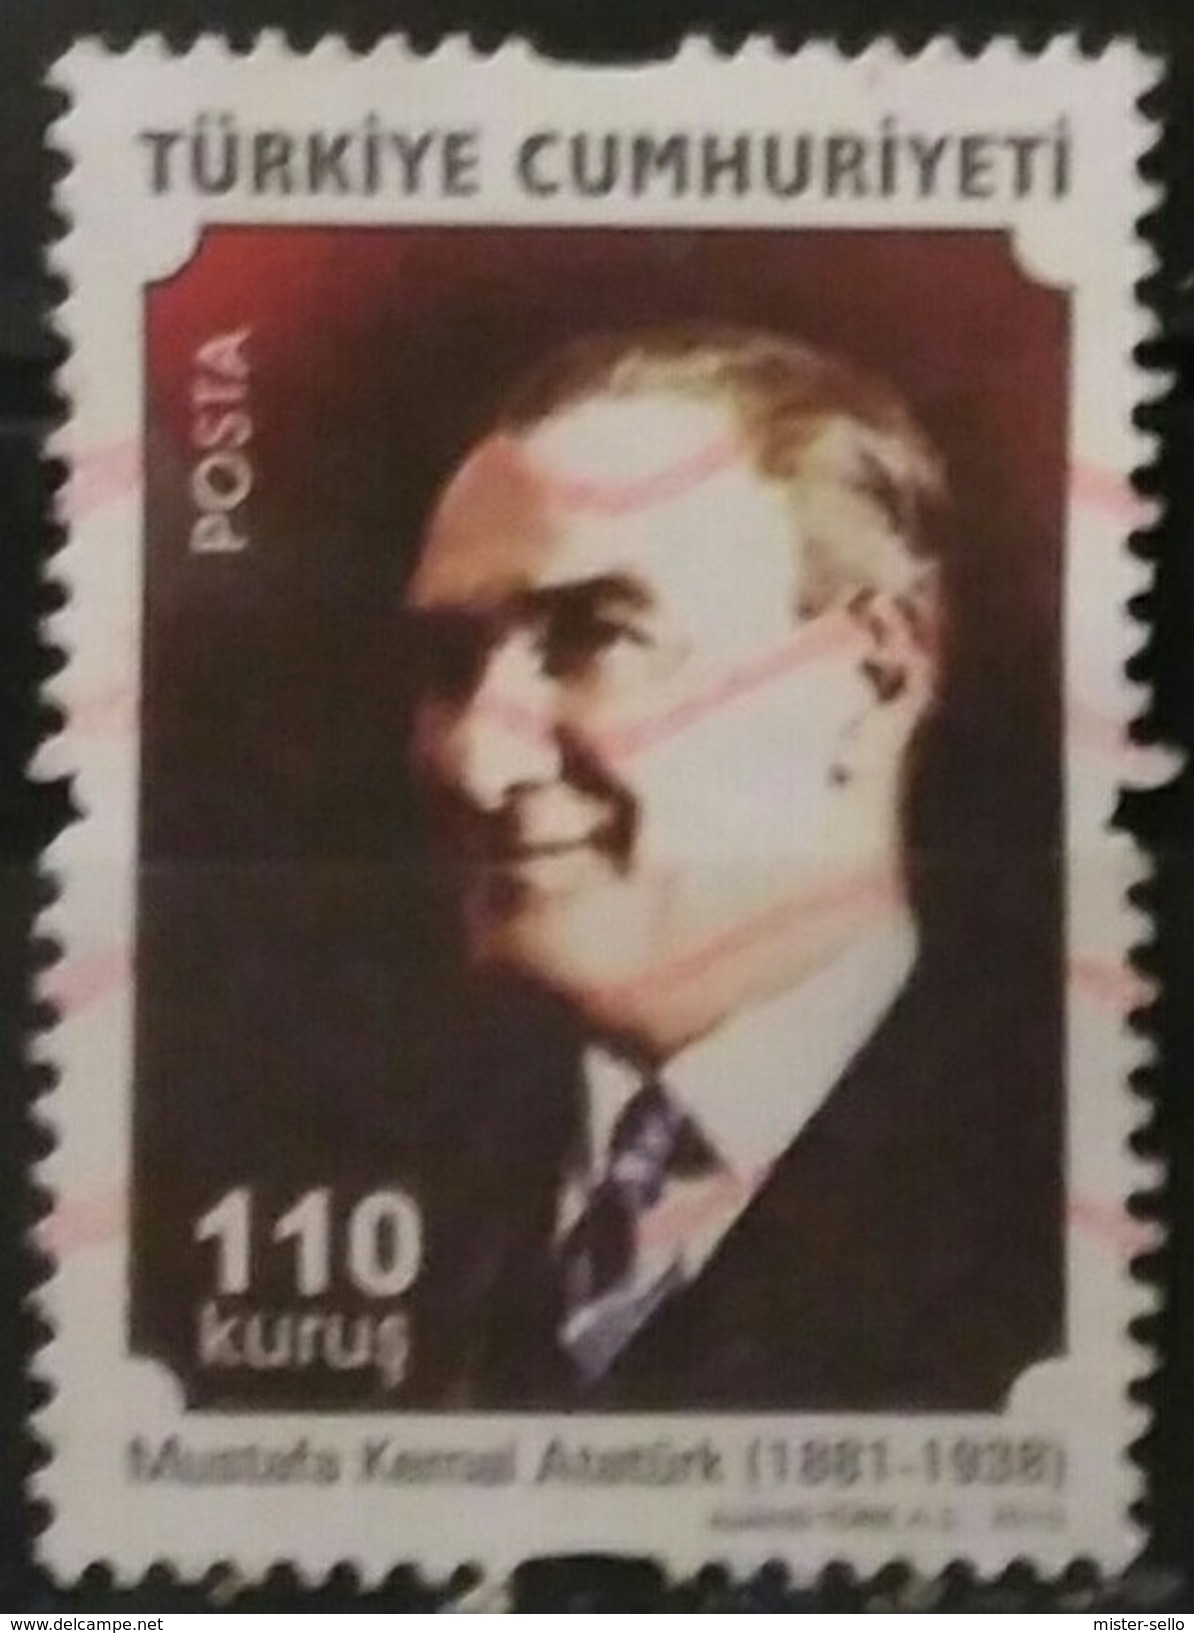 TURQUIA 2010 Definitive Stamps Featuring Ataturk. USADO - USED. - Used Stamps